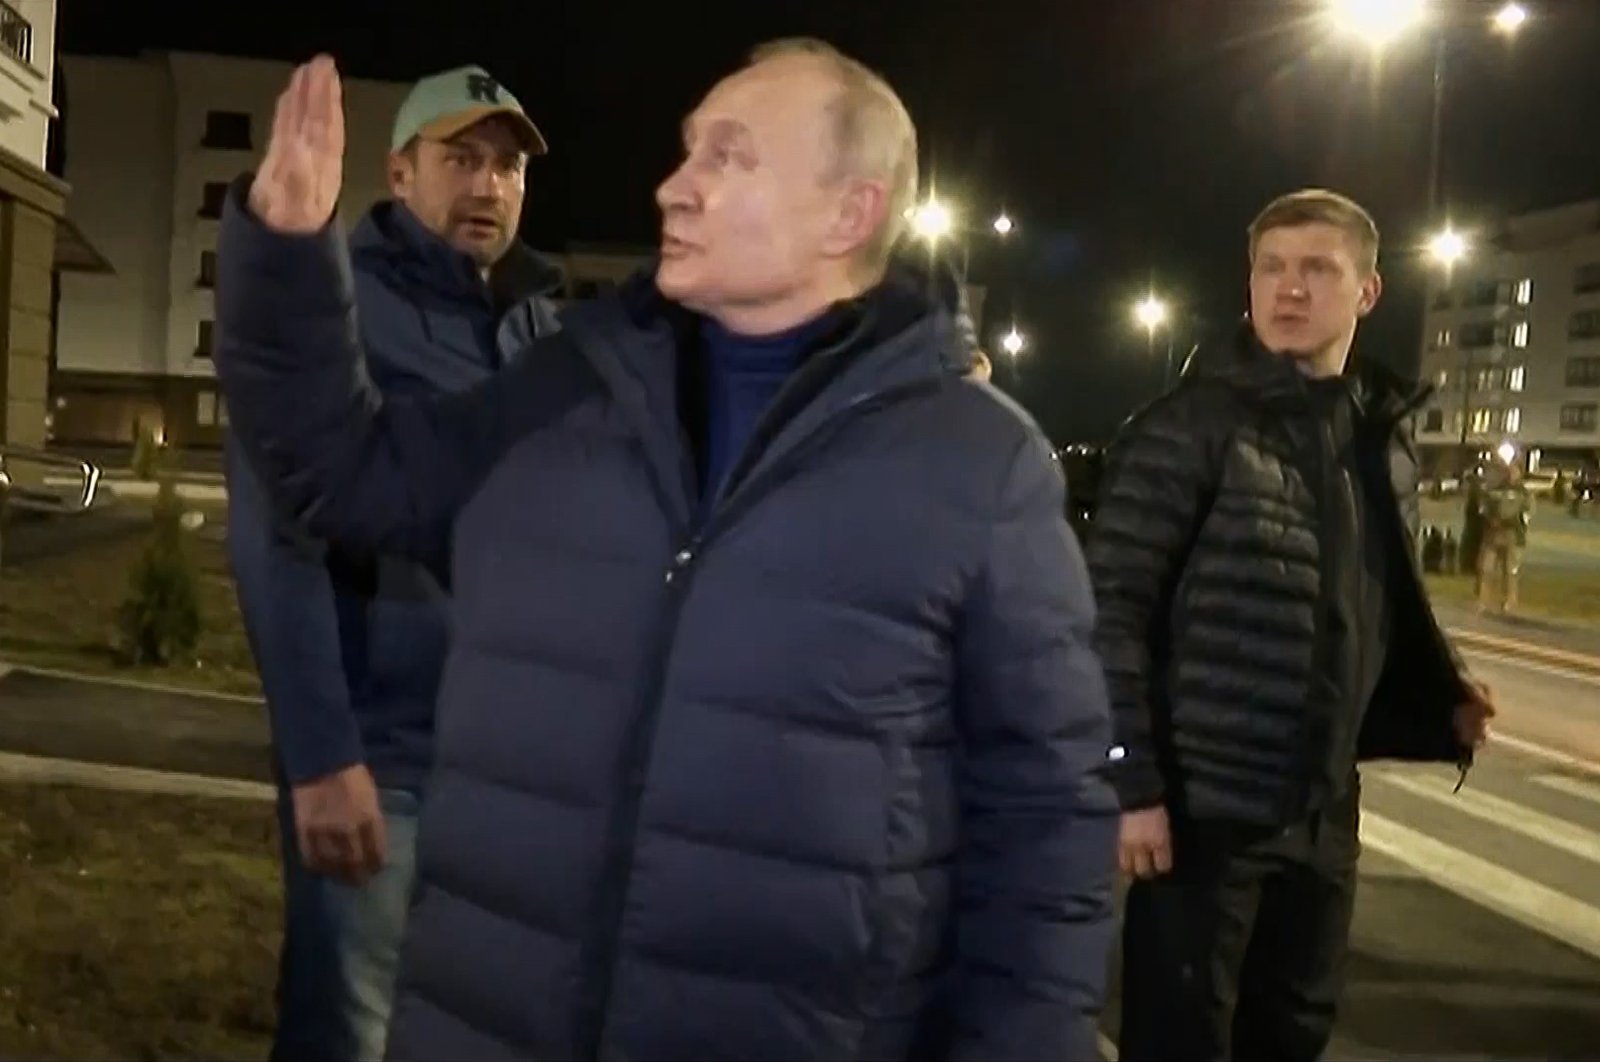 Russian President Vladimir Putin (C) waves at local residents during a visit to Mariupol in the Russia-controlled Donetsk region, Ukraine, March 19, 2023. (AP Photo)